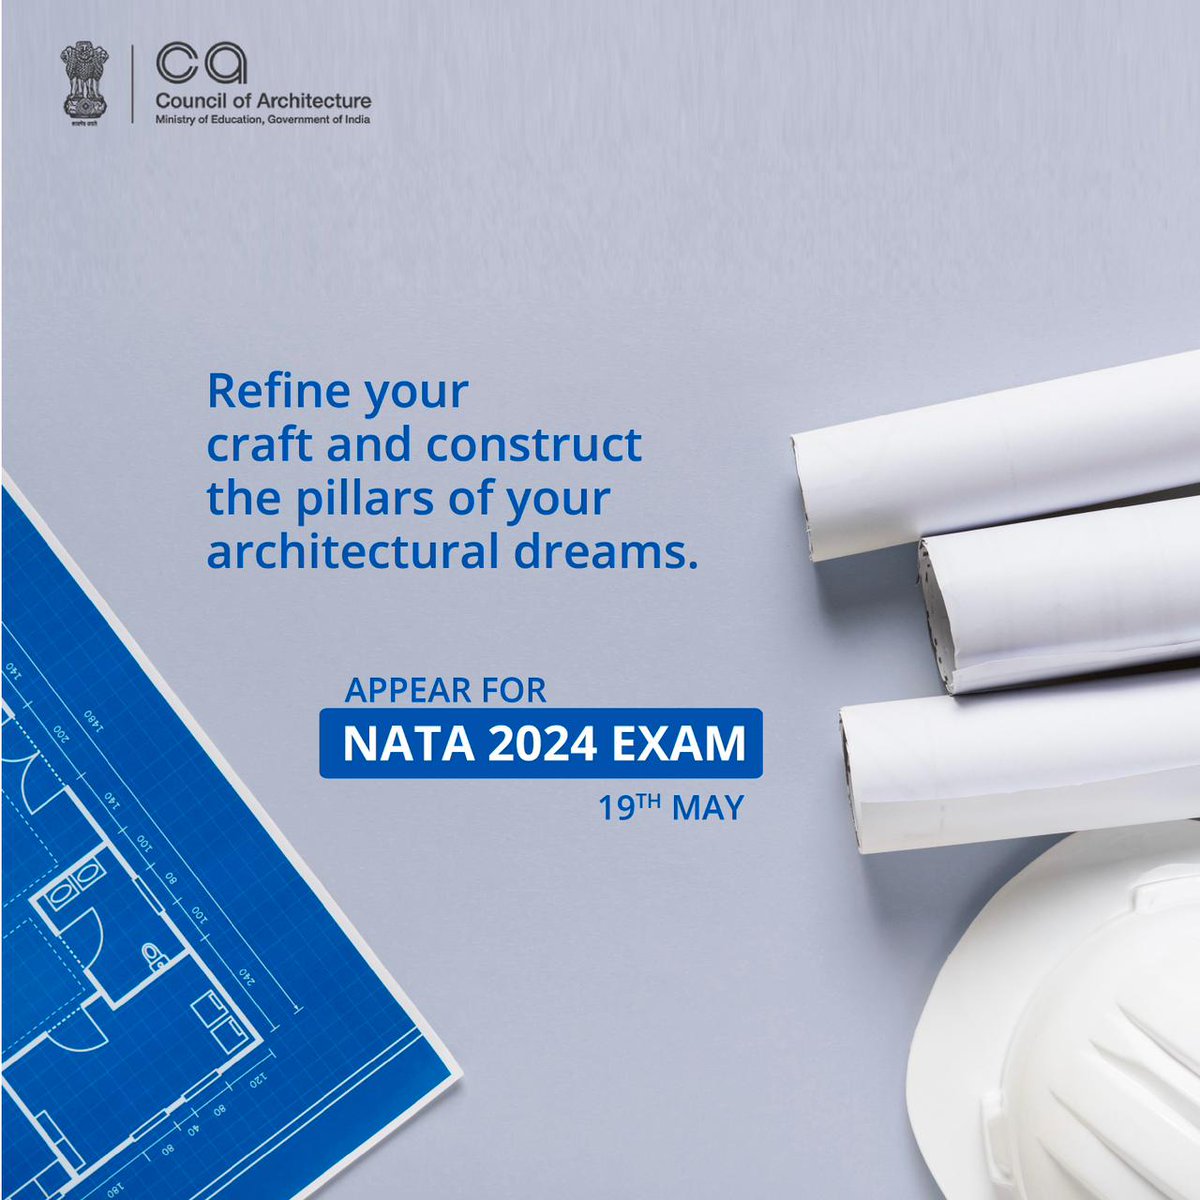 Aspiring architects, it's finally here! Today's the day you unleash your creativity and conquer the NATA exam. ✨

➡️ Let's go crush this!

#NATAExamDay #FutureArchitects #aspiringarchitects #architecture #architecturaldreams #councilofarchitecture